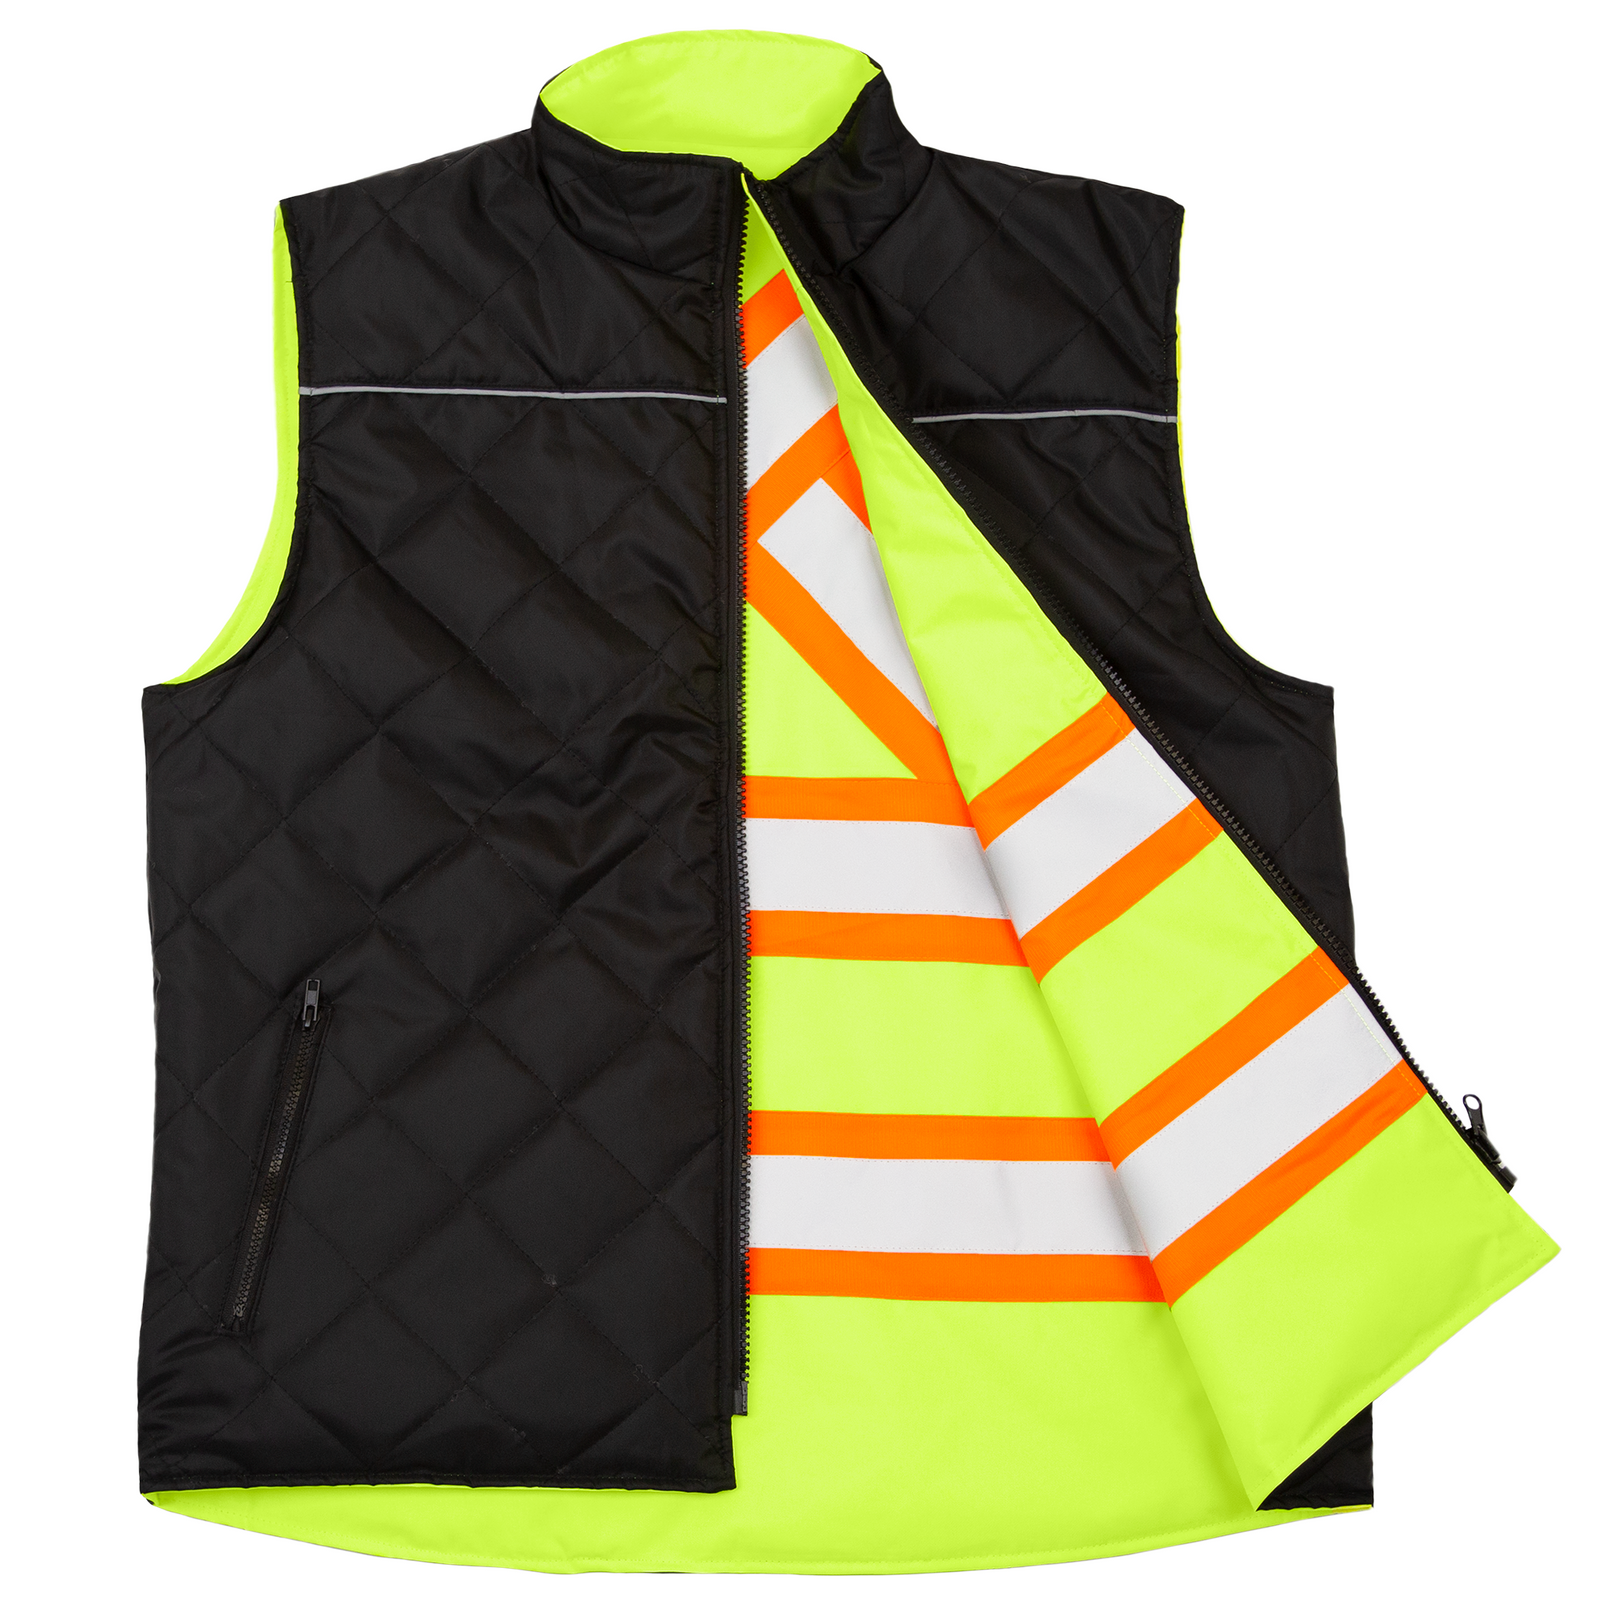 Front view  of the black side of the vi-vis X on back reversible insulated safety vest ANSI class 2 type R with reflective strips